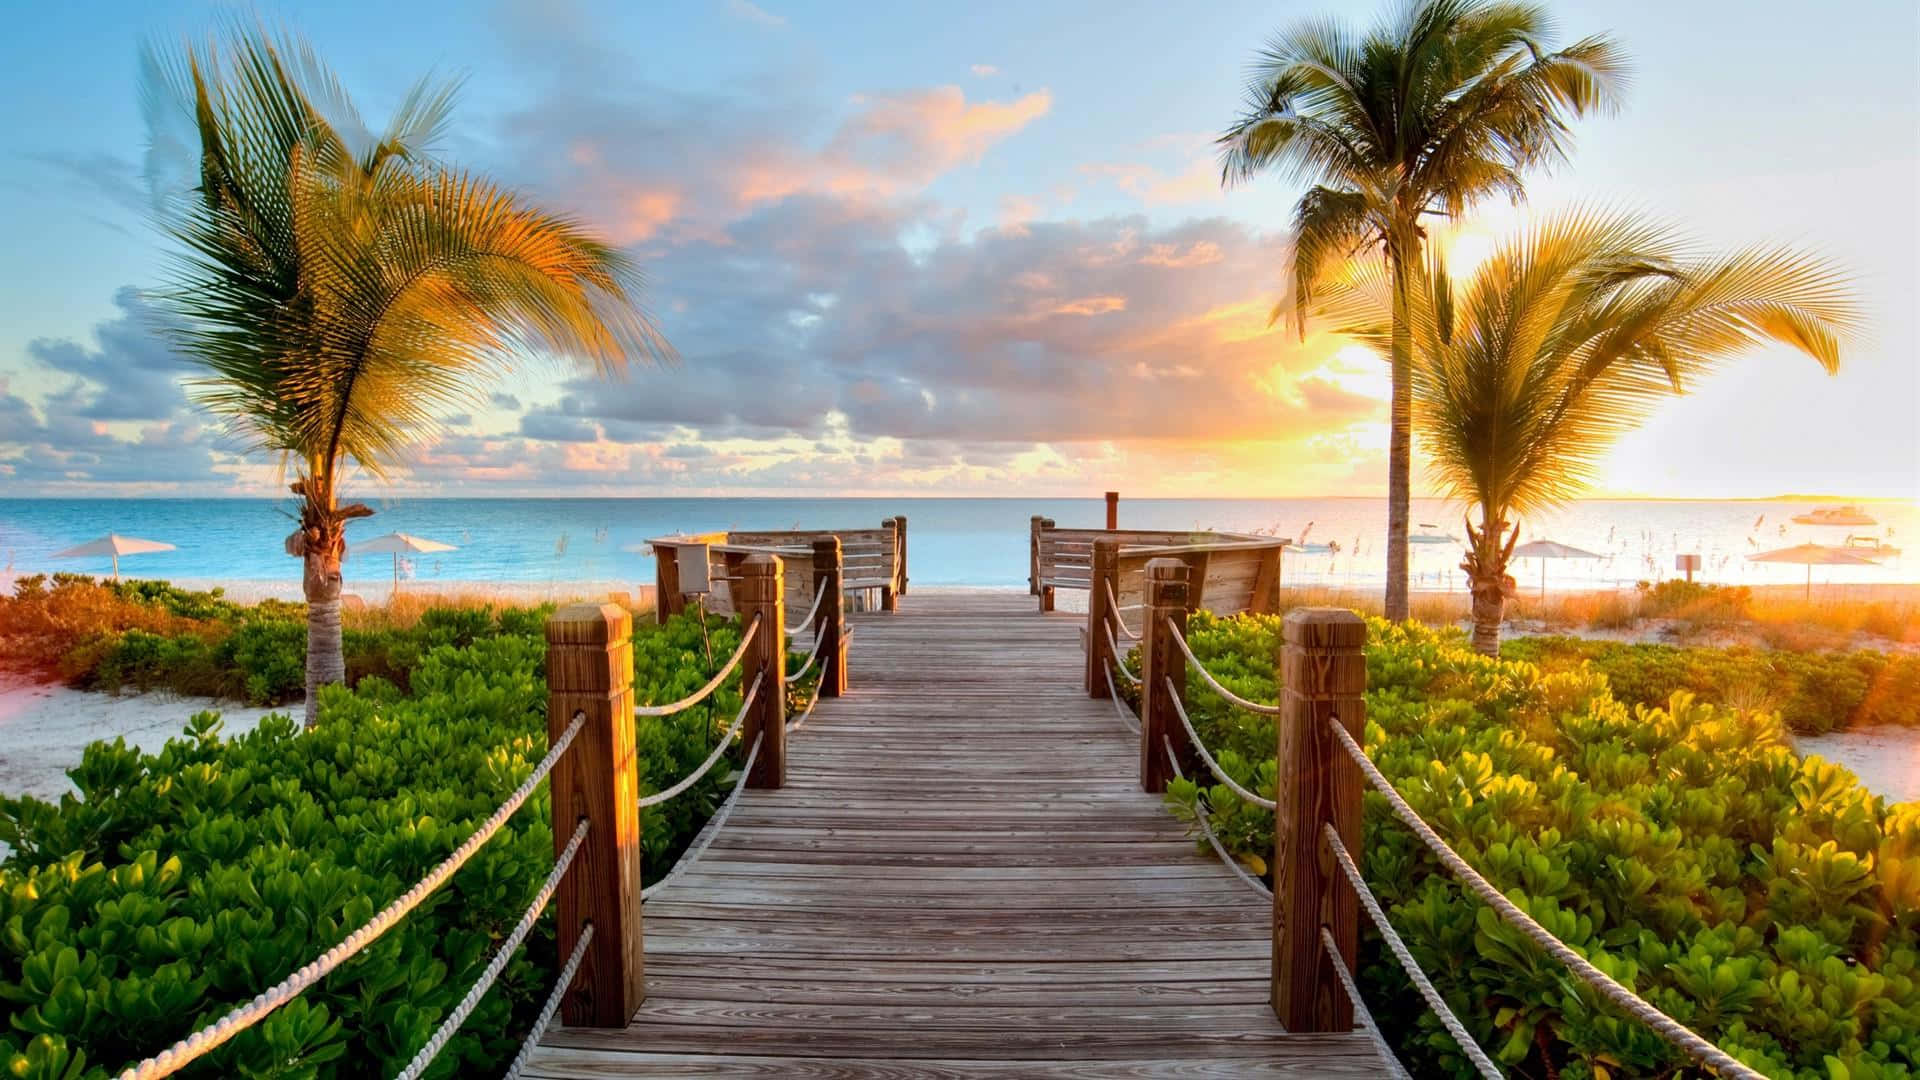 A Wooden Walkway Leading To The Beach At Sunset